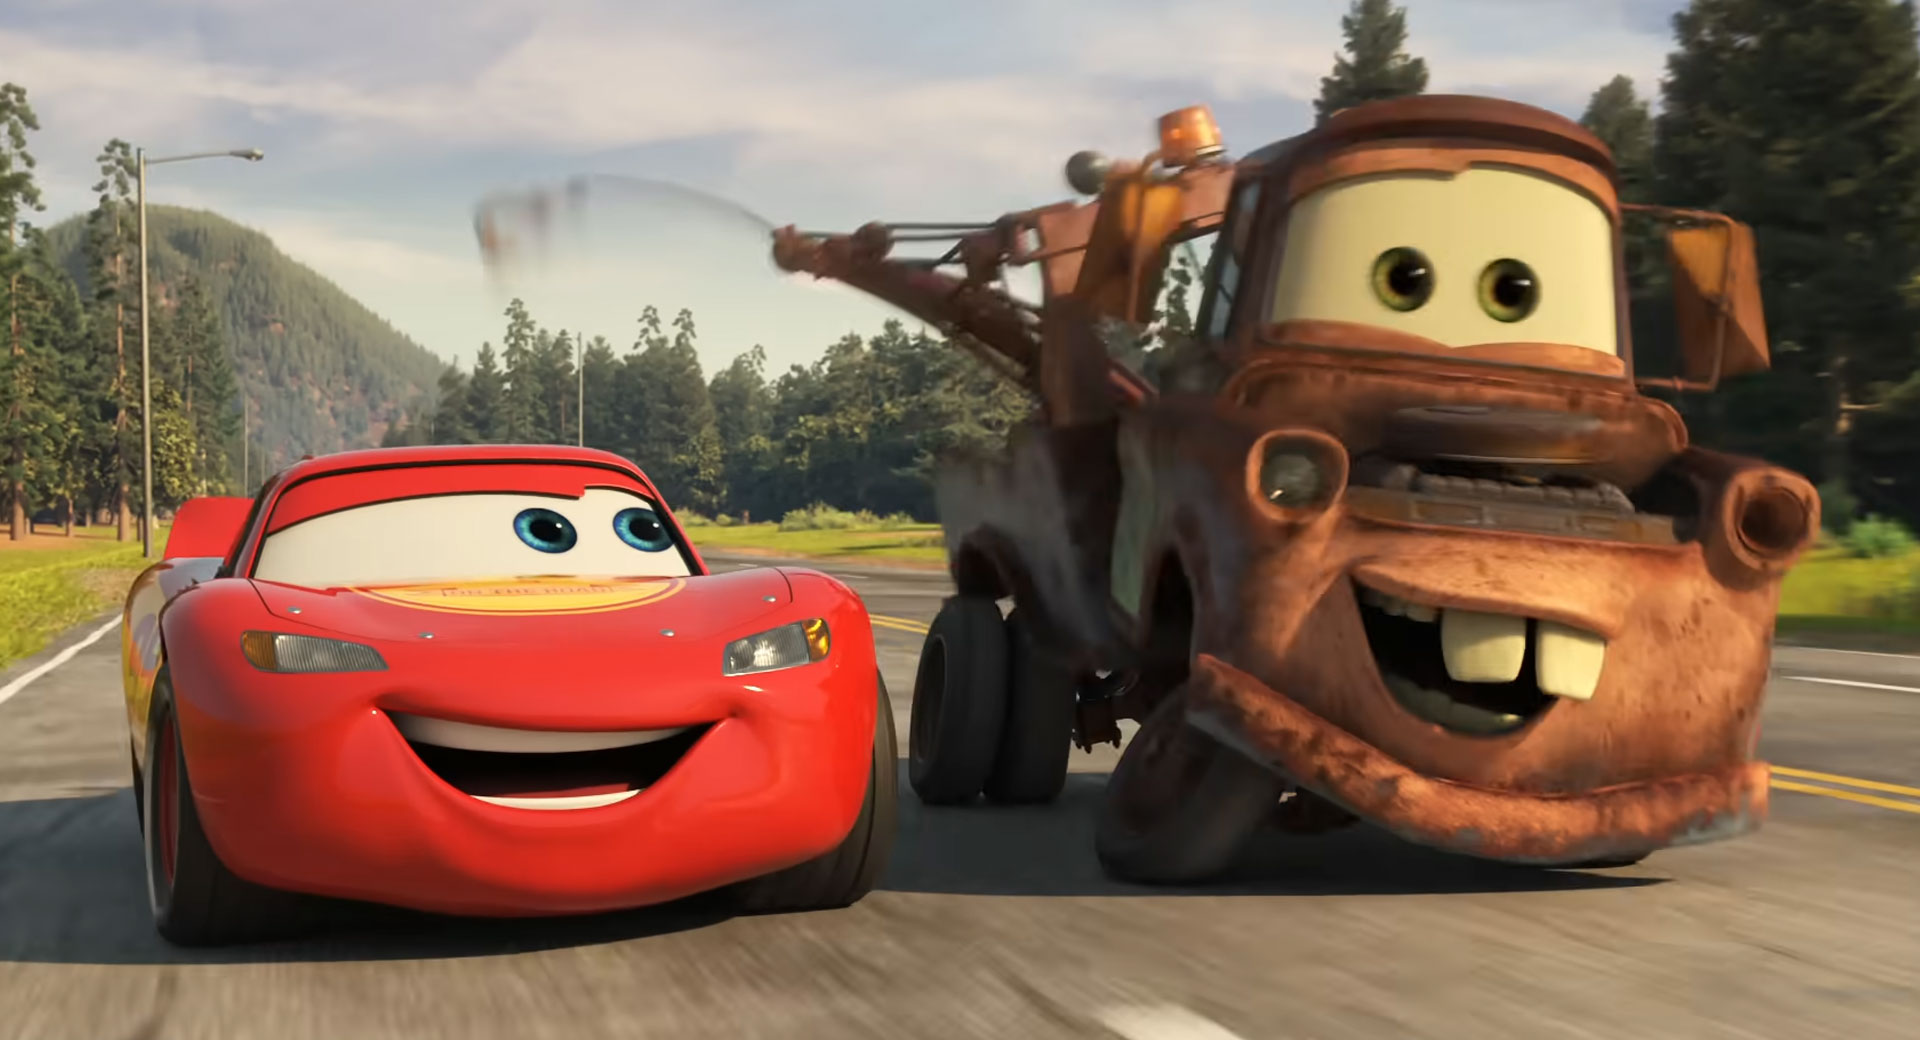 Lightning McQueen And Mater Return In “Cars On The Road,” Hits Disney+  September 8th